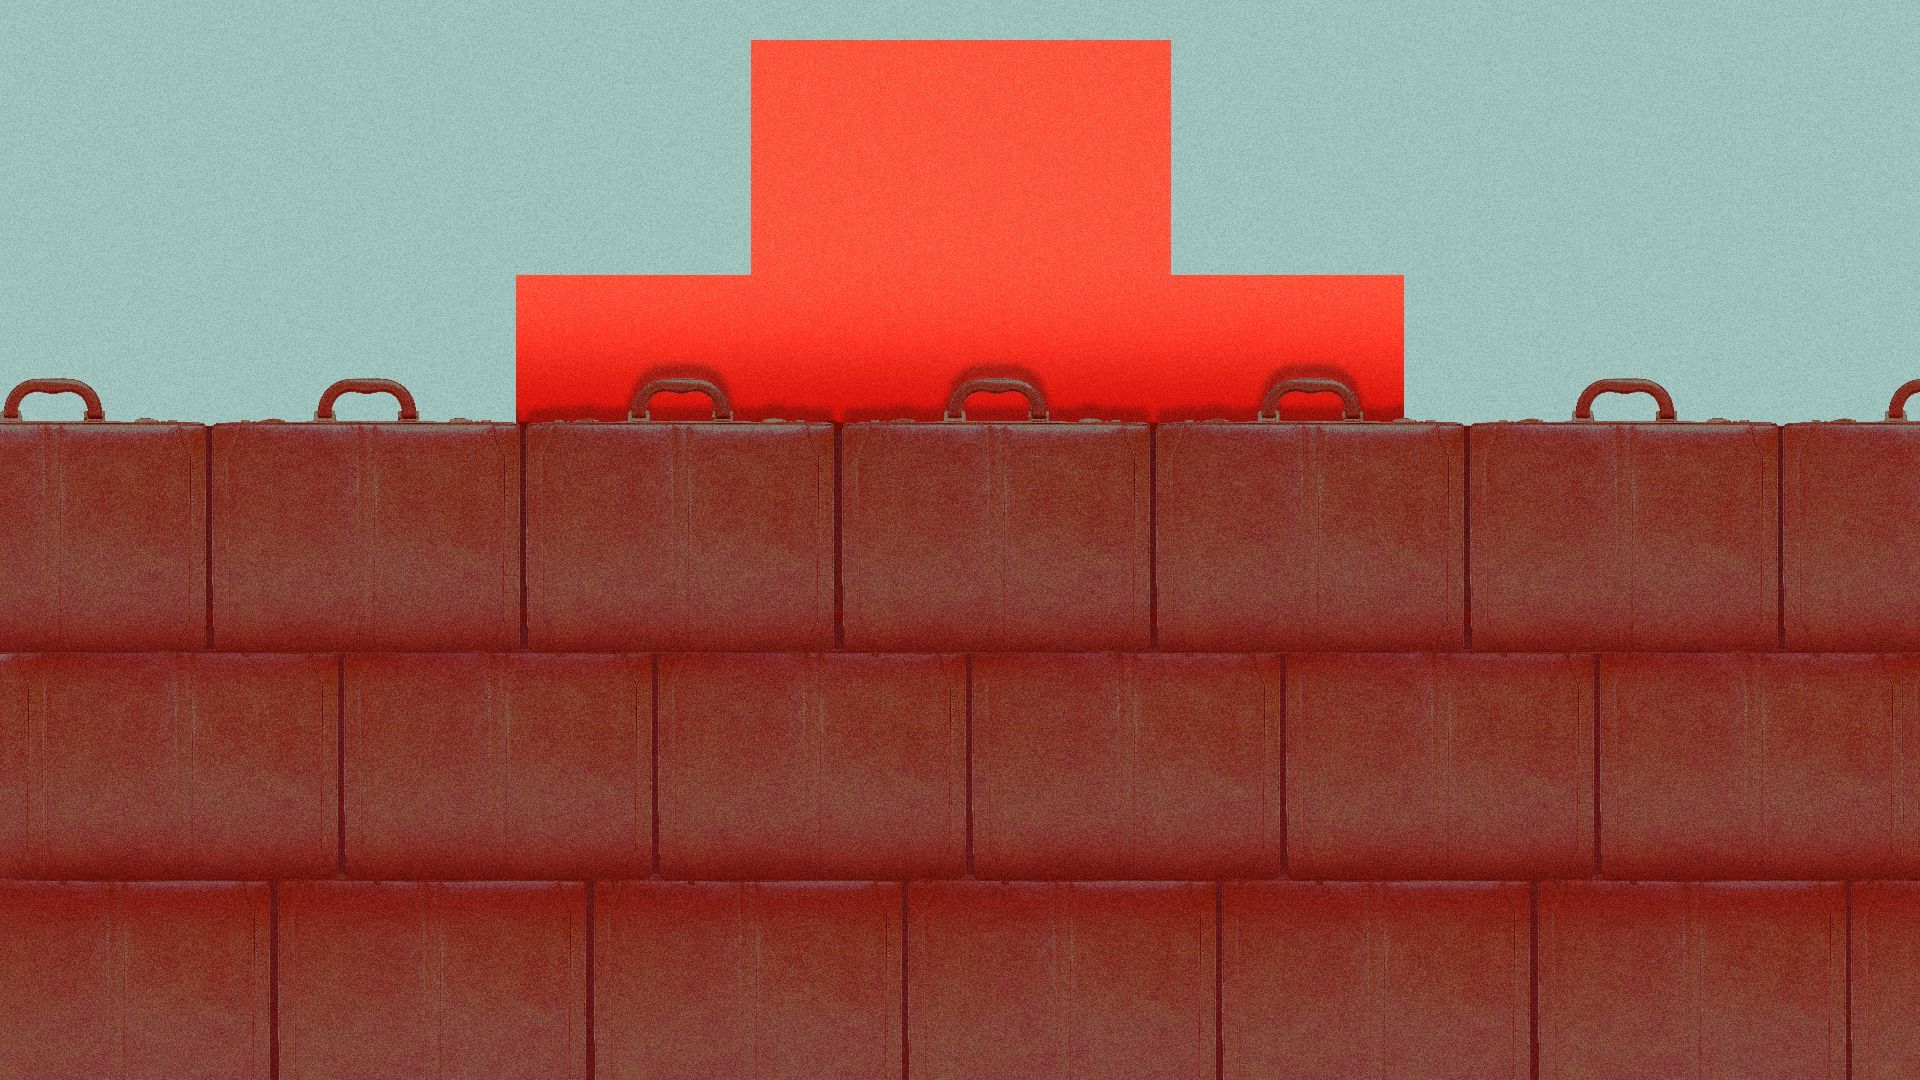 Illustration of briefcases forming a brick wall in front of a giant red cross. 